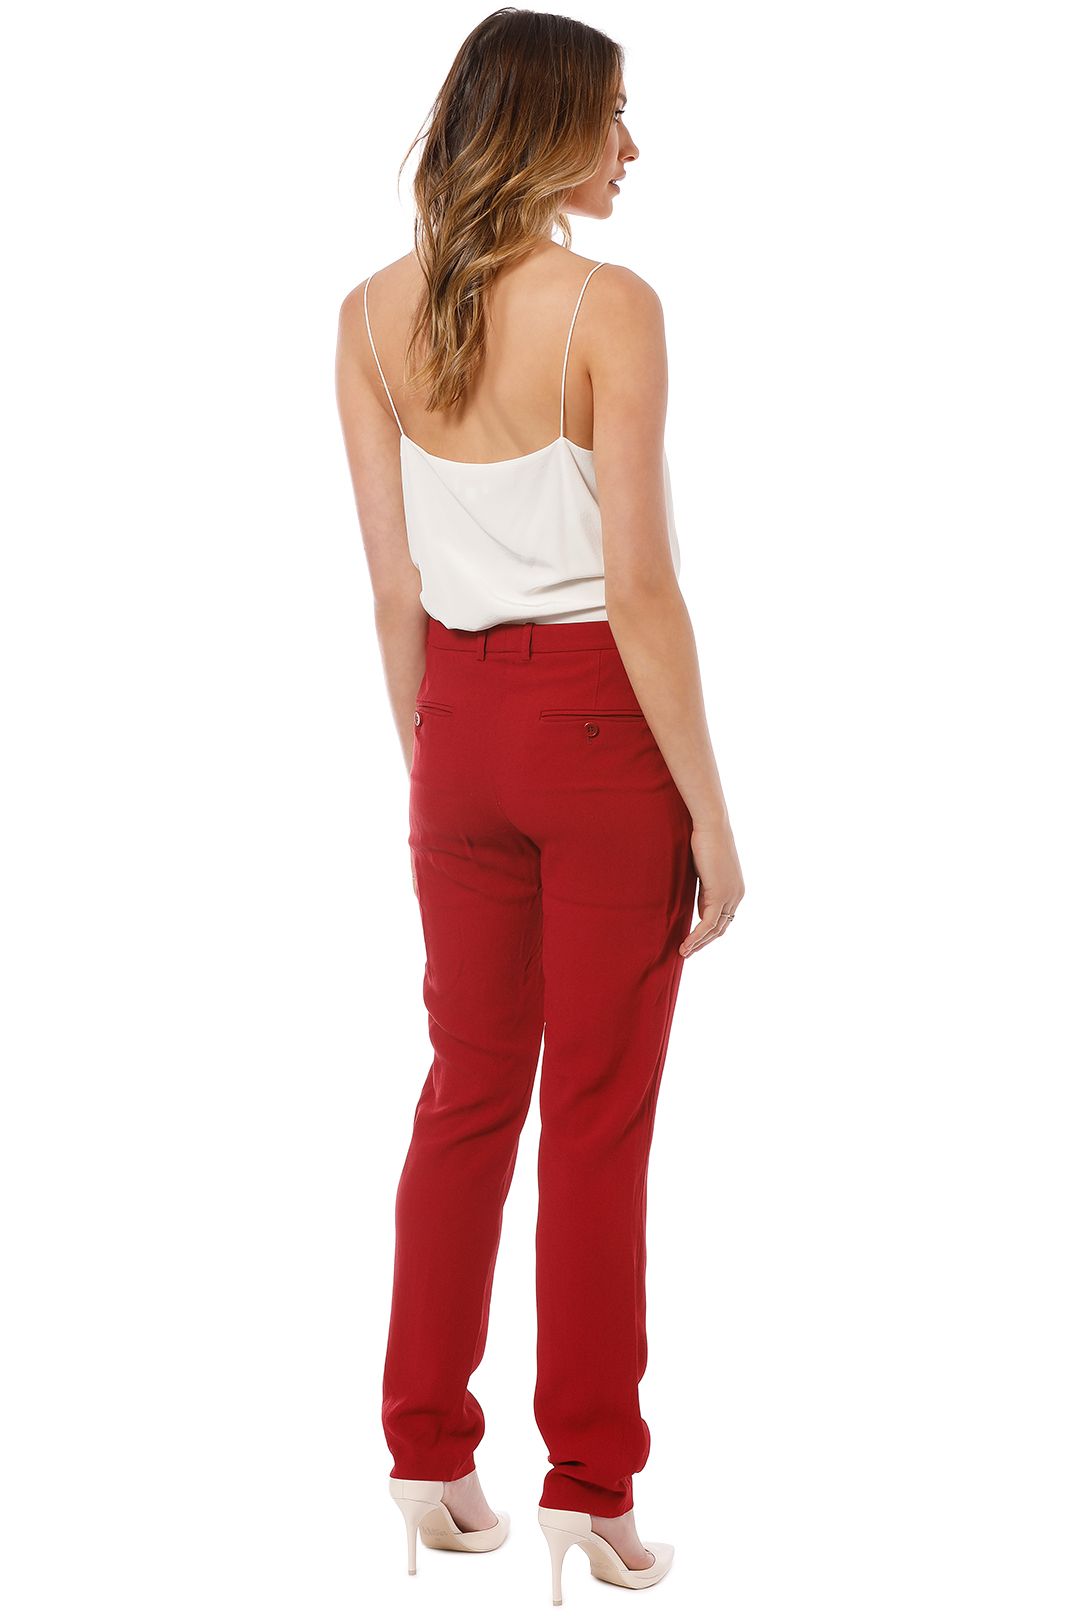 Theory - Crepe Power Pant - Red - Back